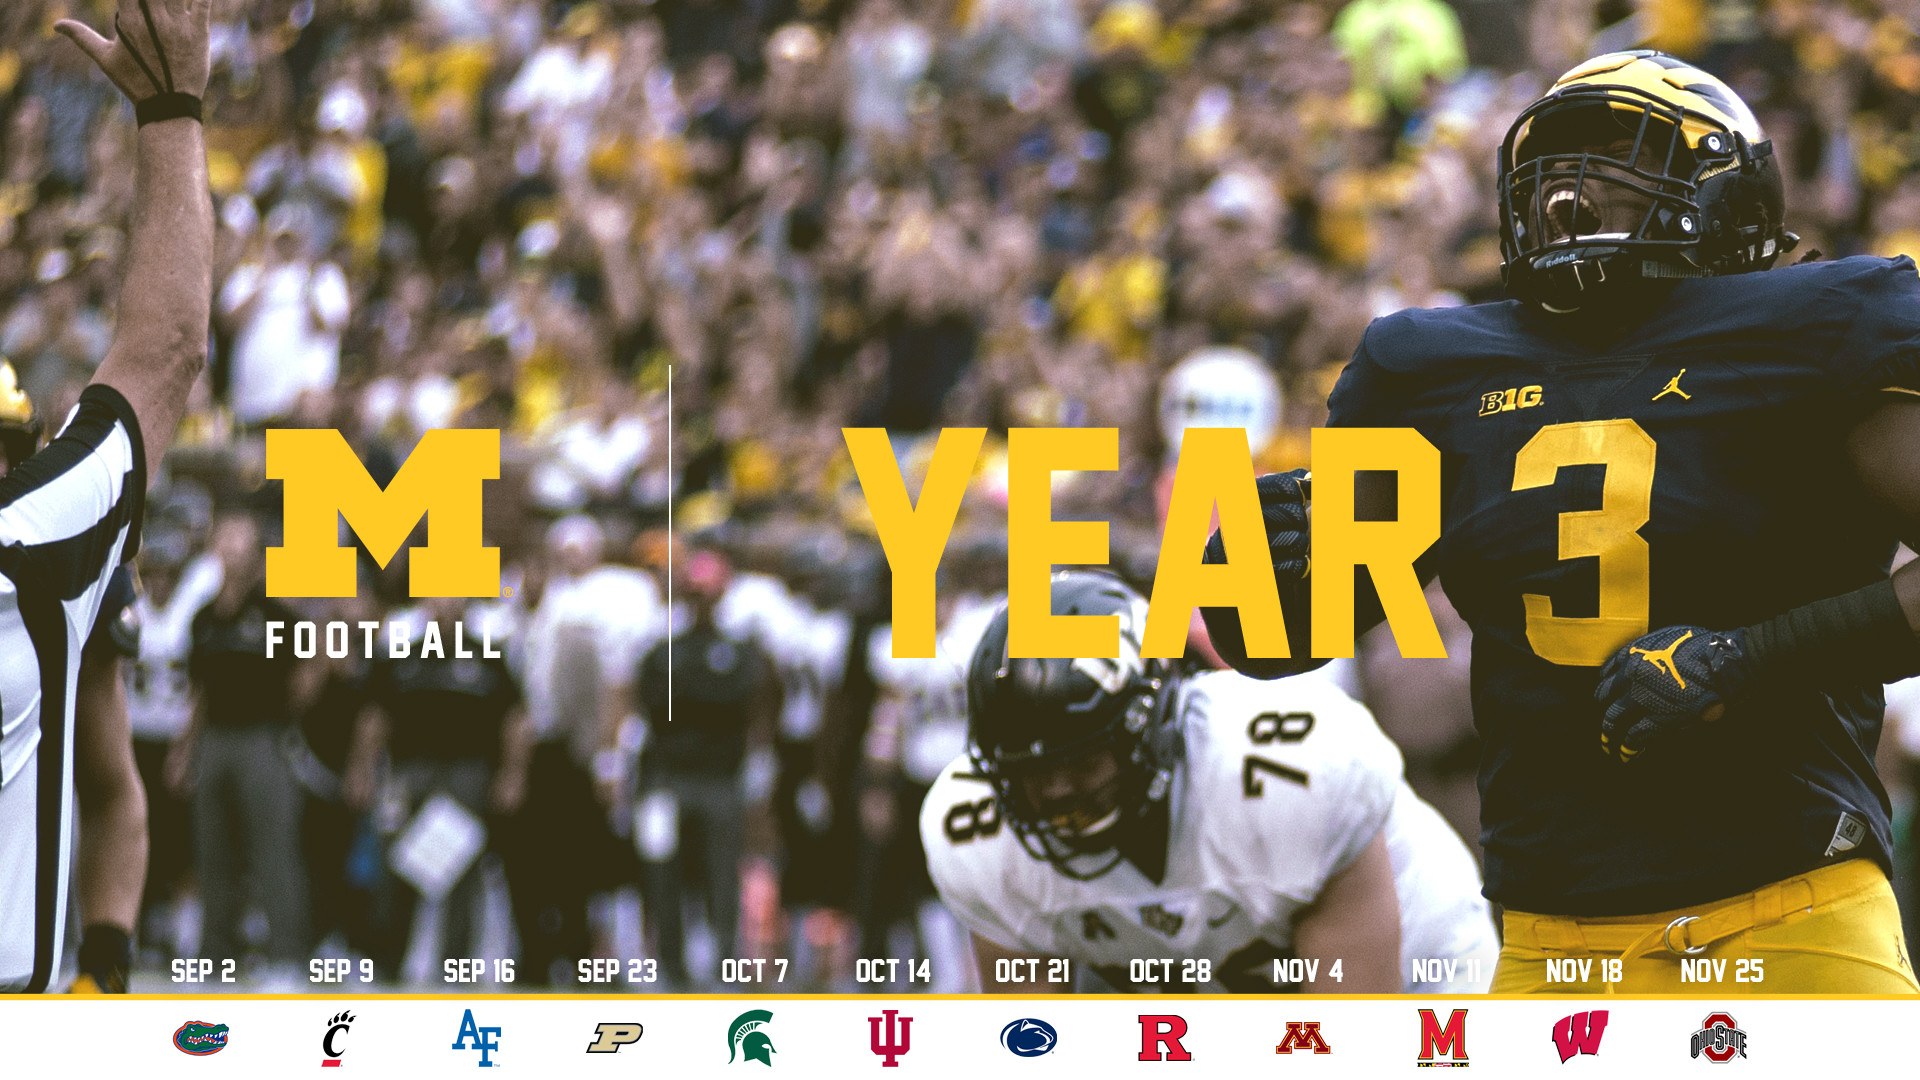 1920x1080 Michigan Football Wallpapers by BeanGoBlue - 2017 | Year 3